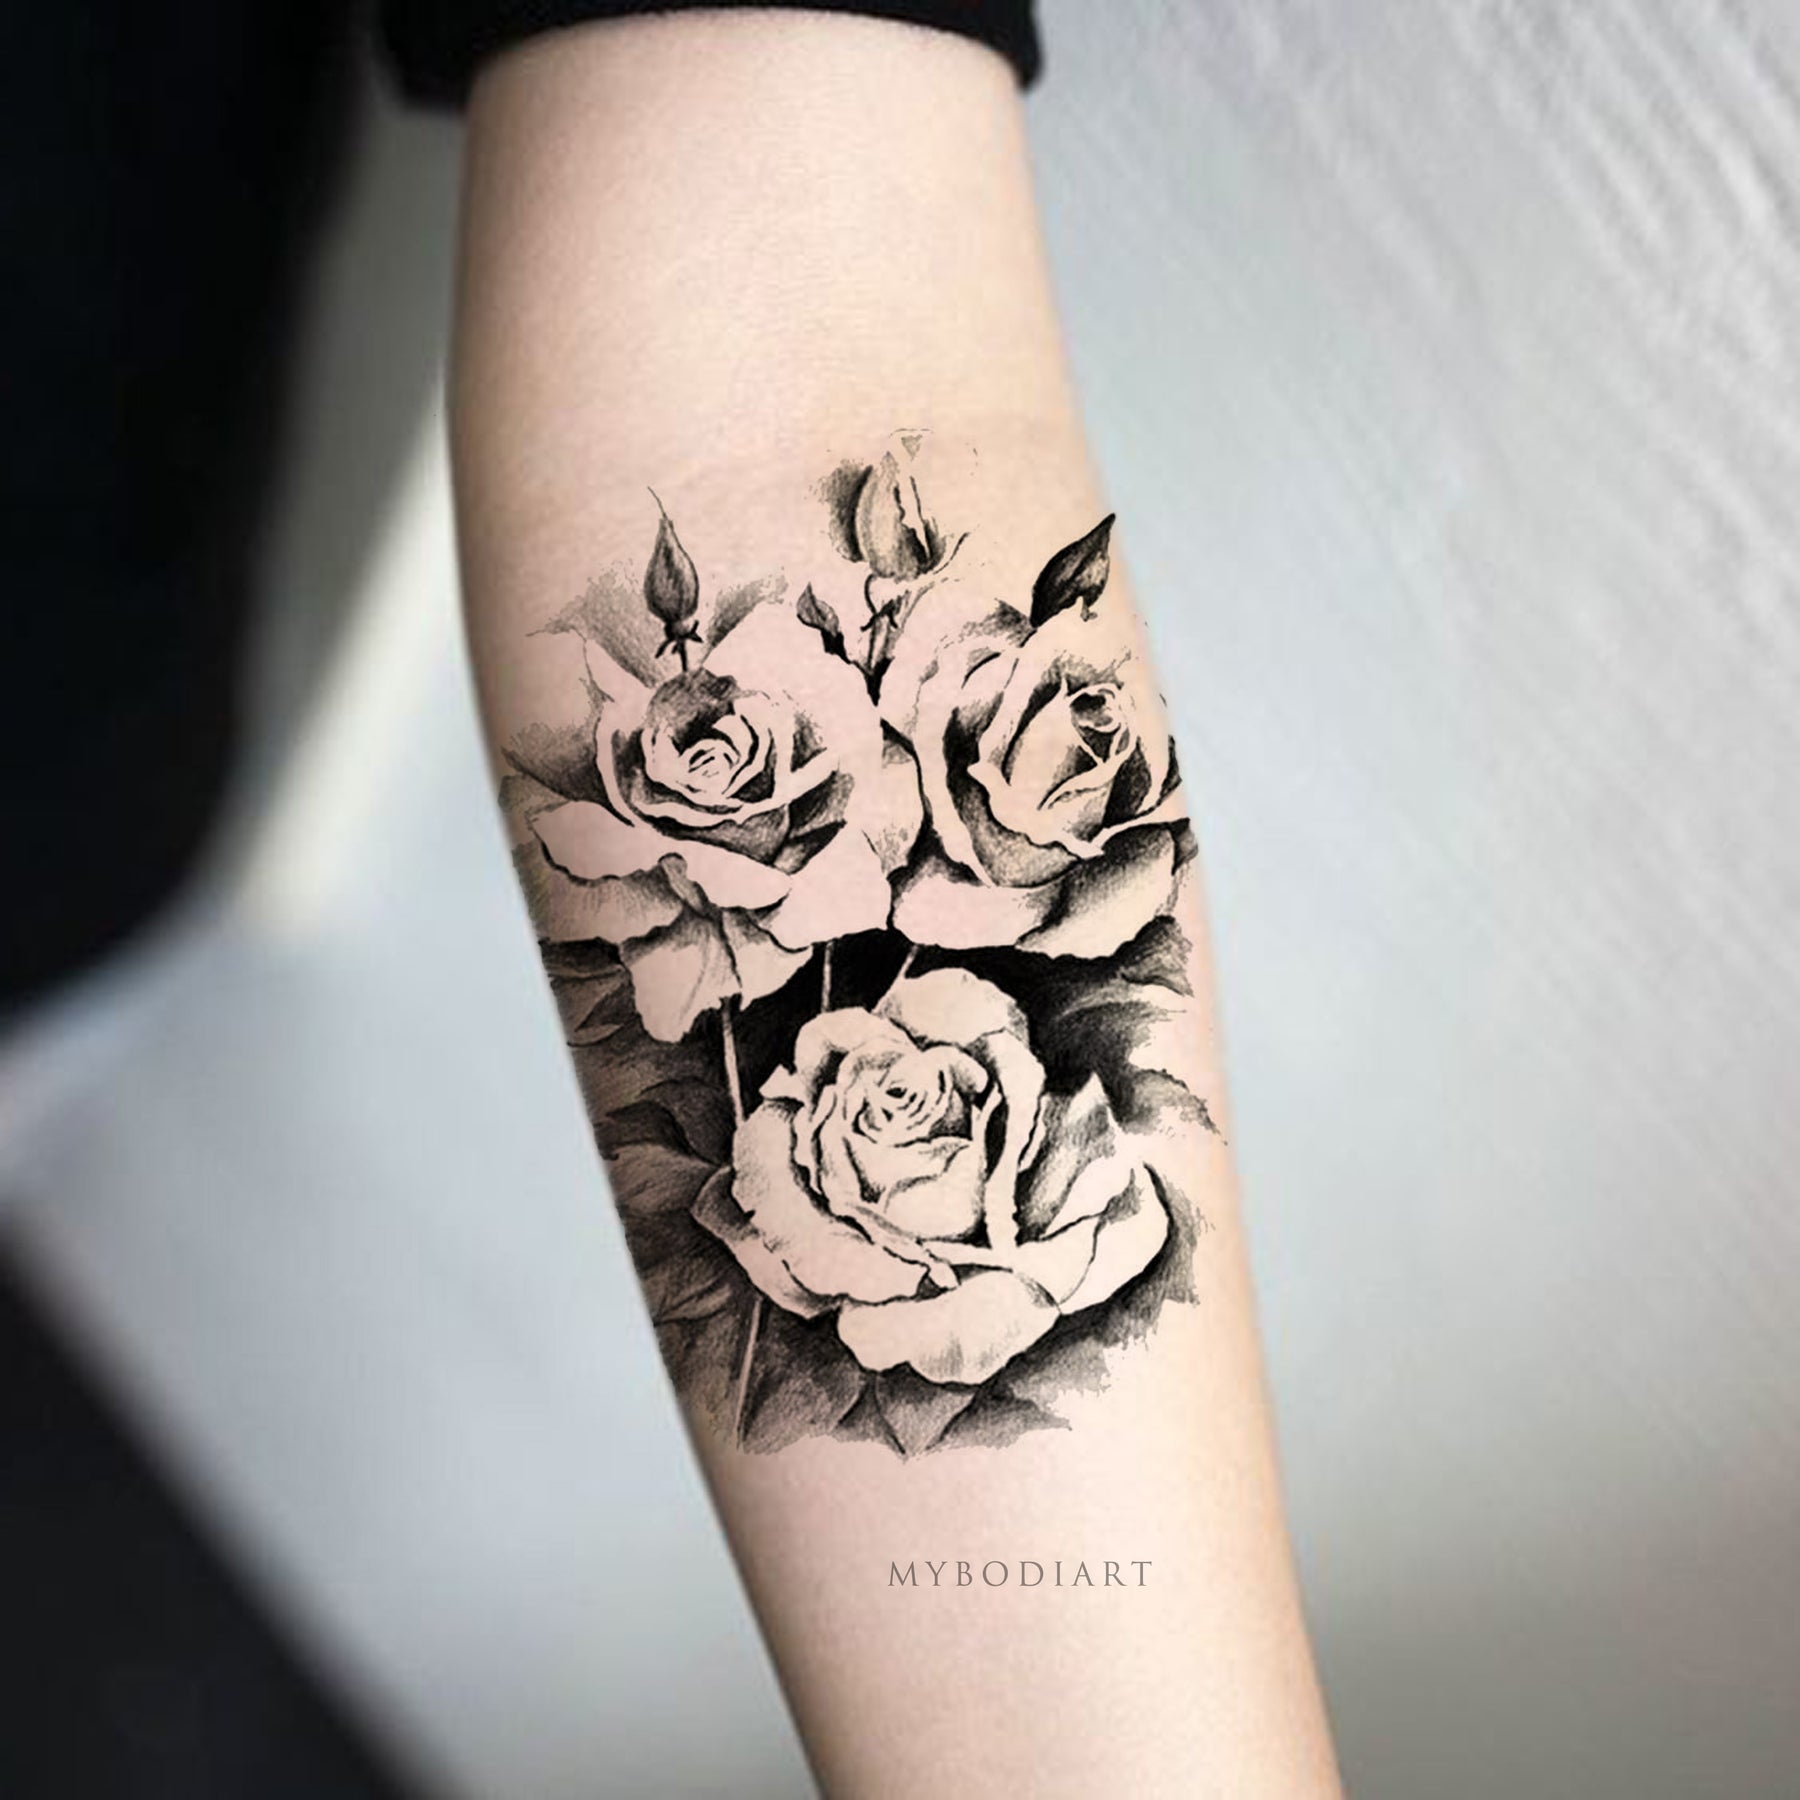 black rose tattoo freevector rose tattoo ideas cdr download  Free Vector